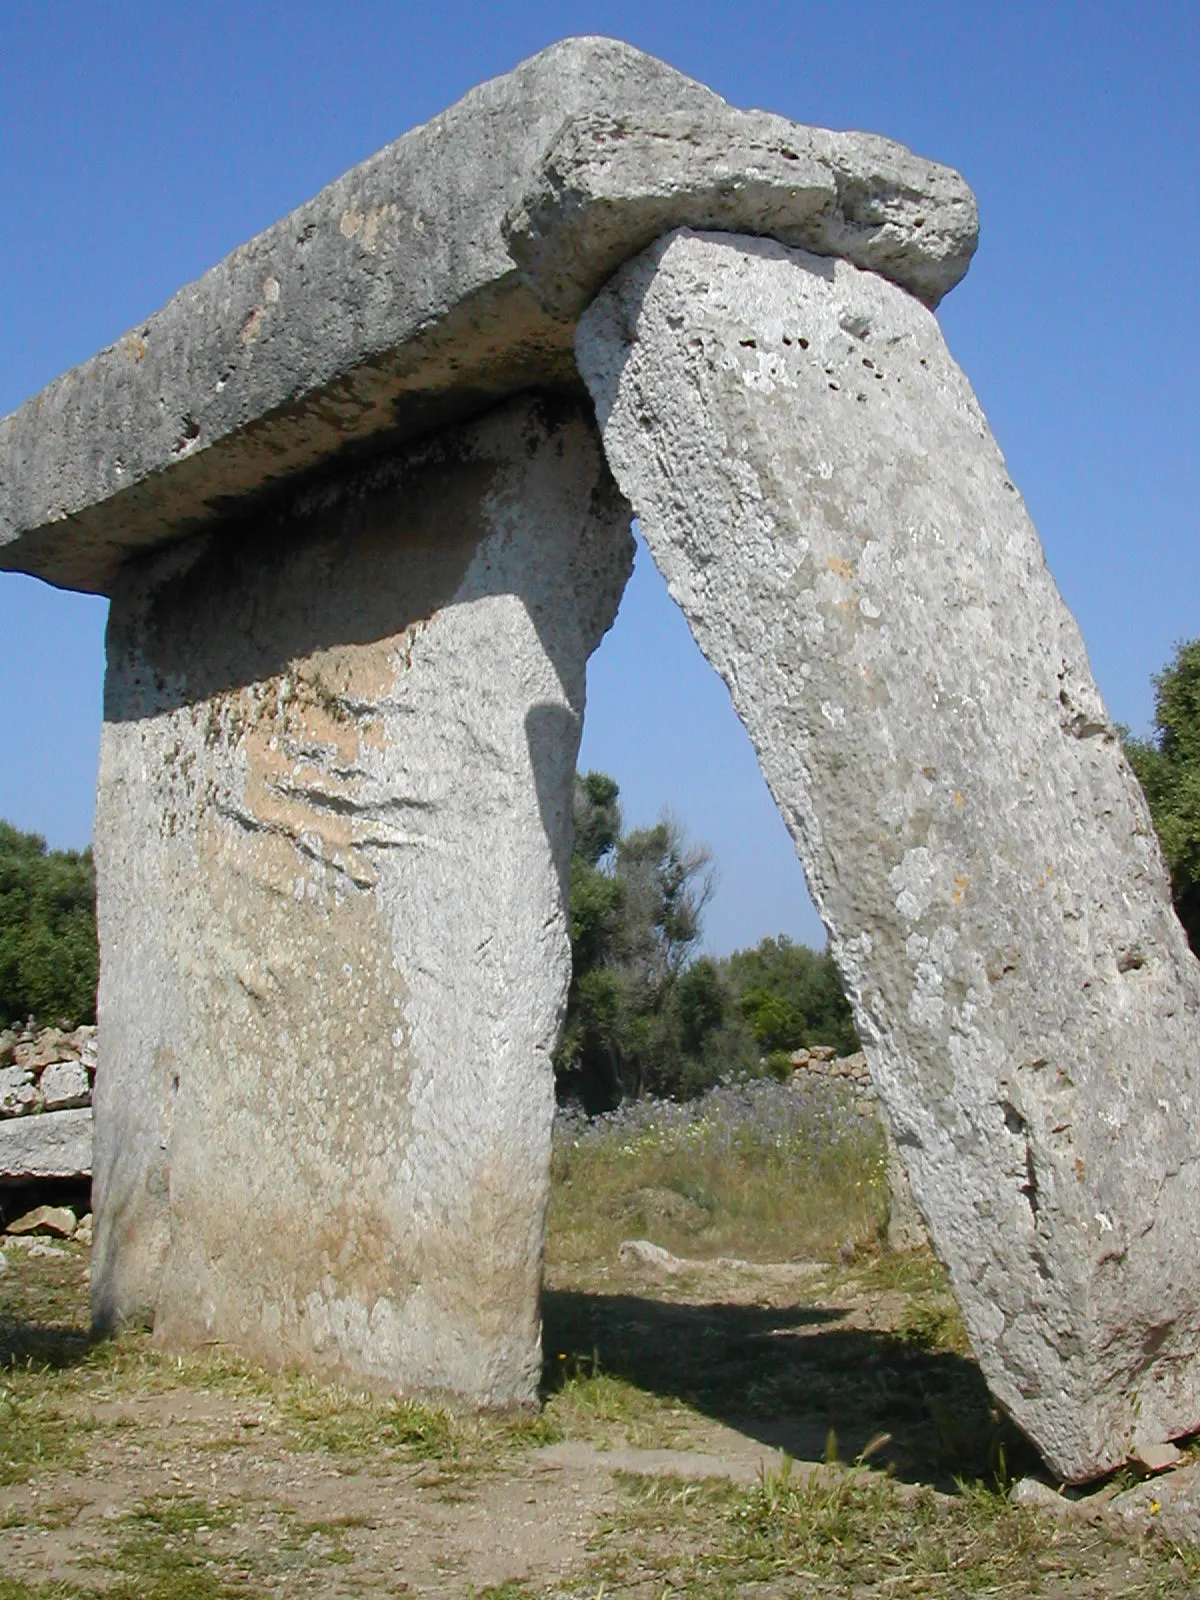 Photo showing: This is a taula from the archaeological site Talatì de Dalt. The site is about 4km west of Maó on the island of Menorca.